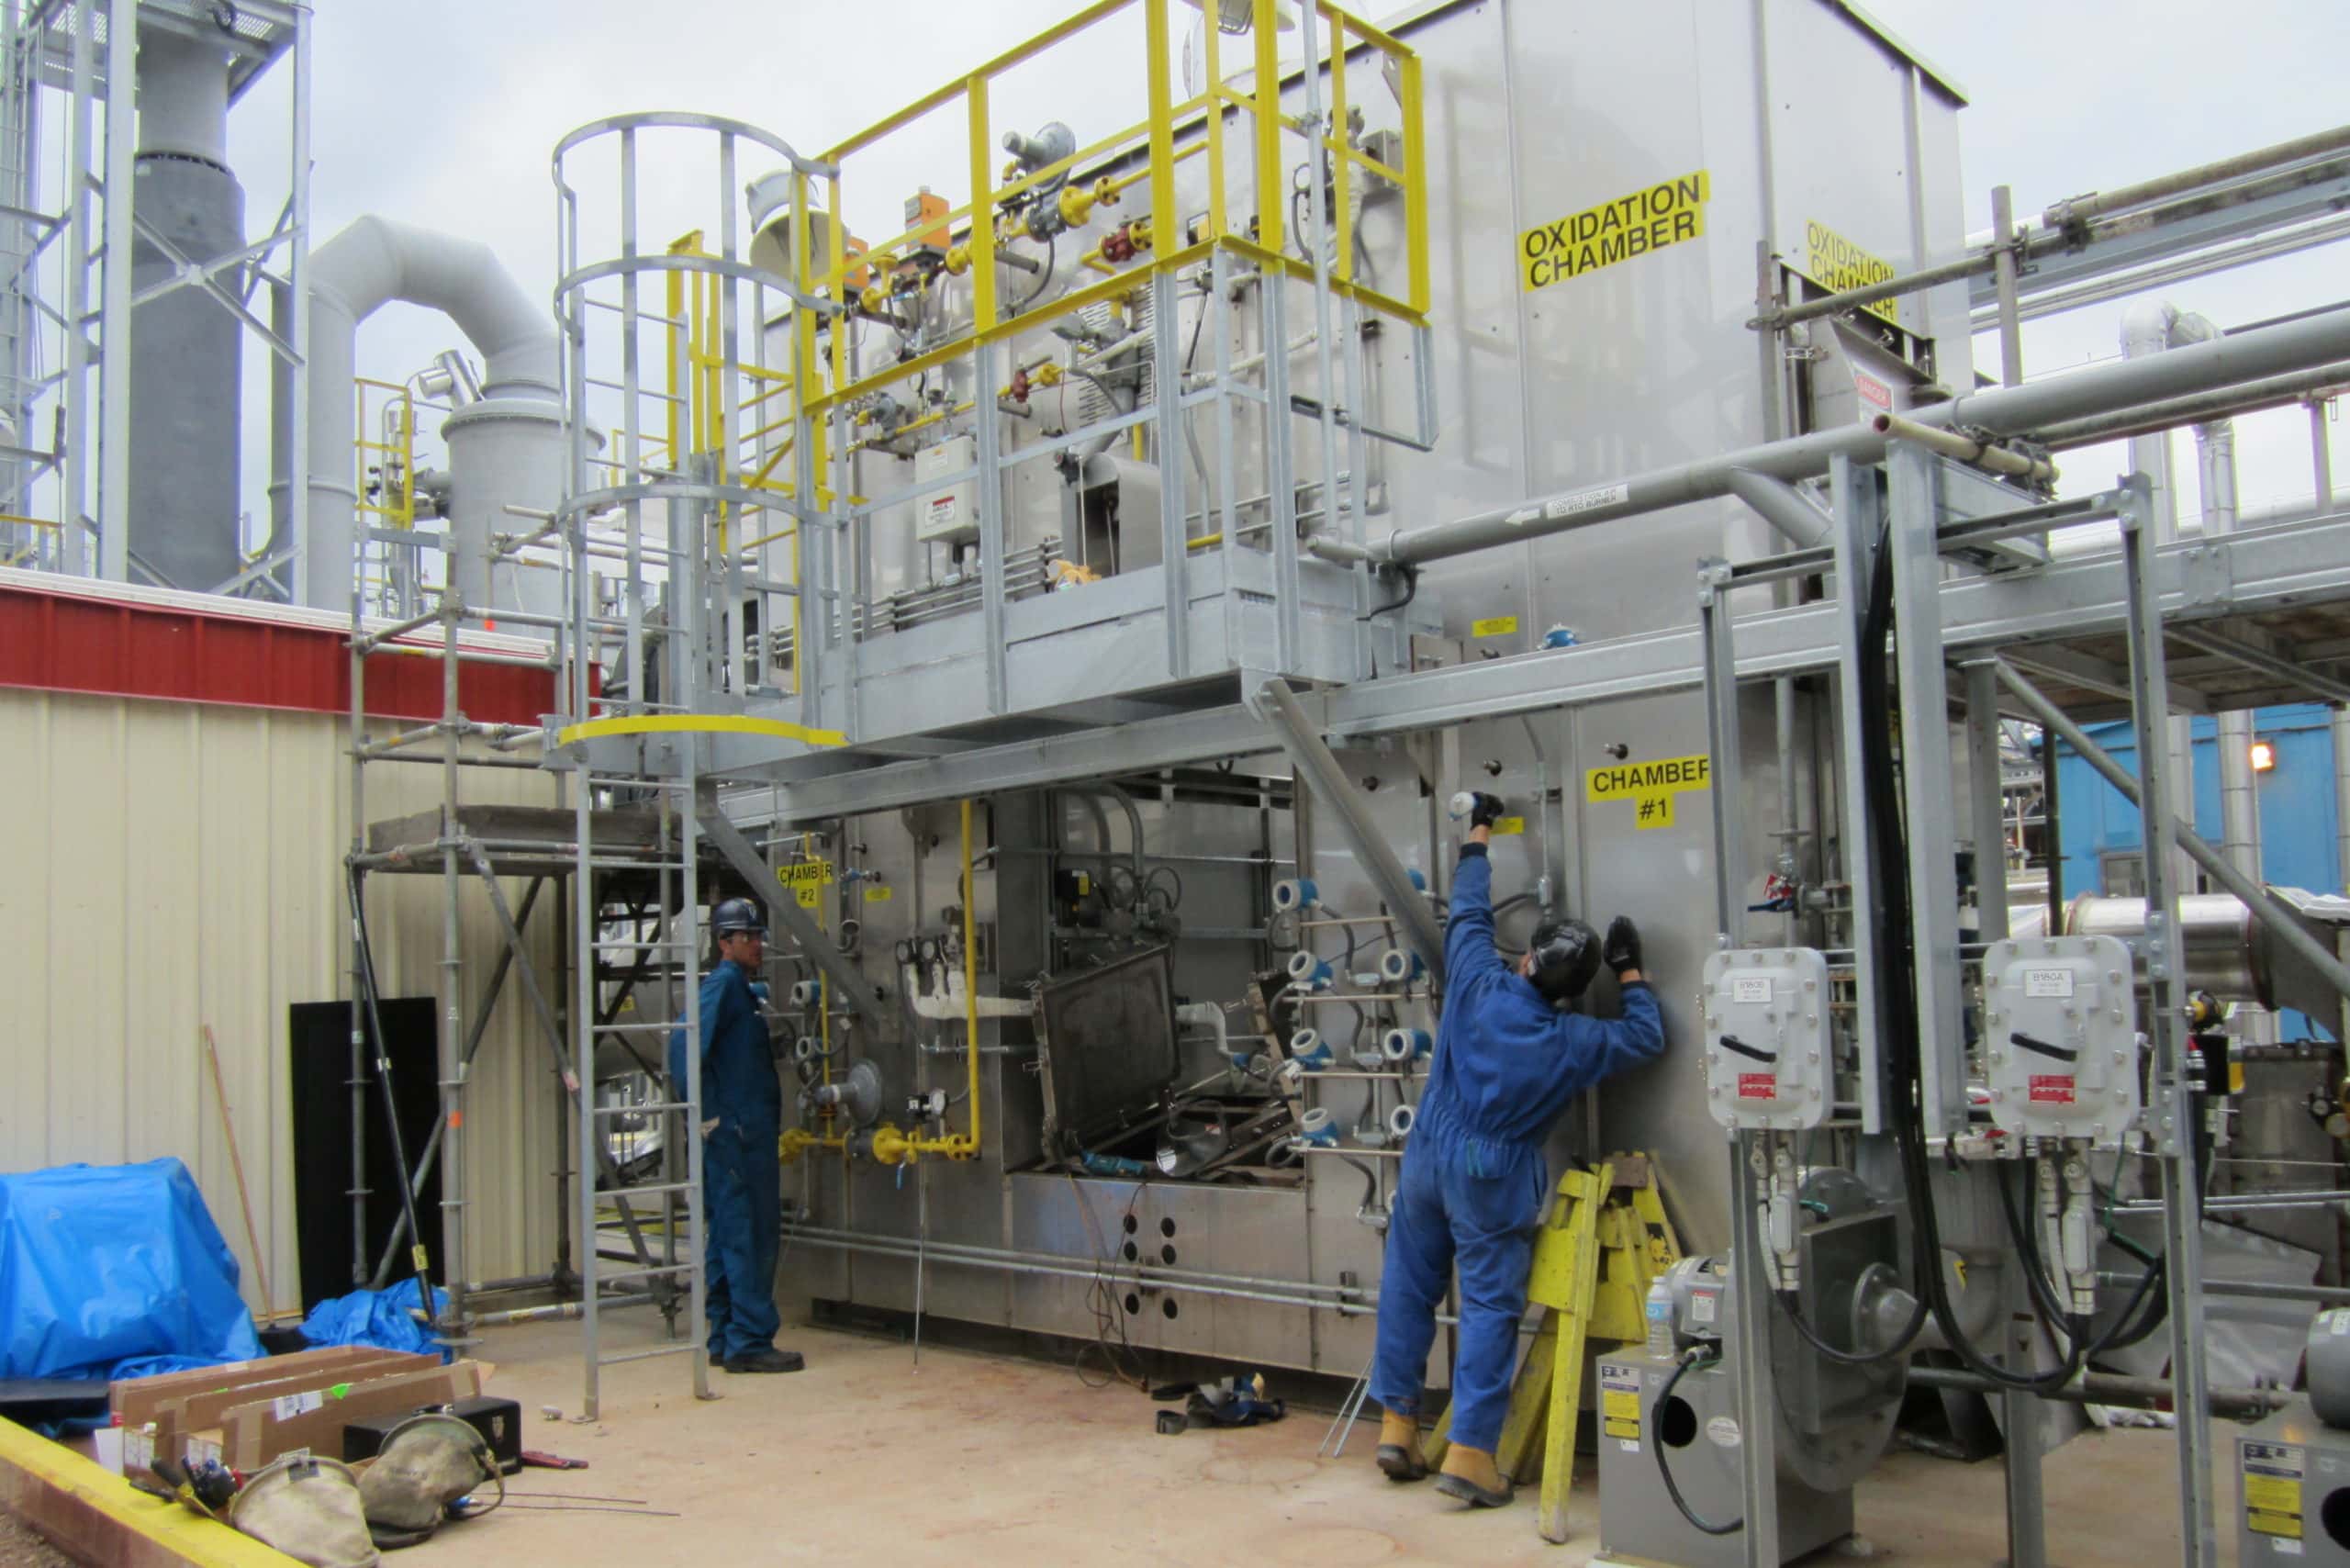 Workers-performing-aftermarket-services-oxidizer